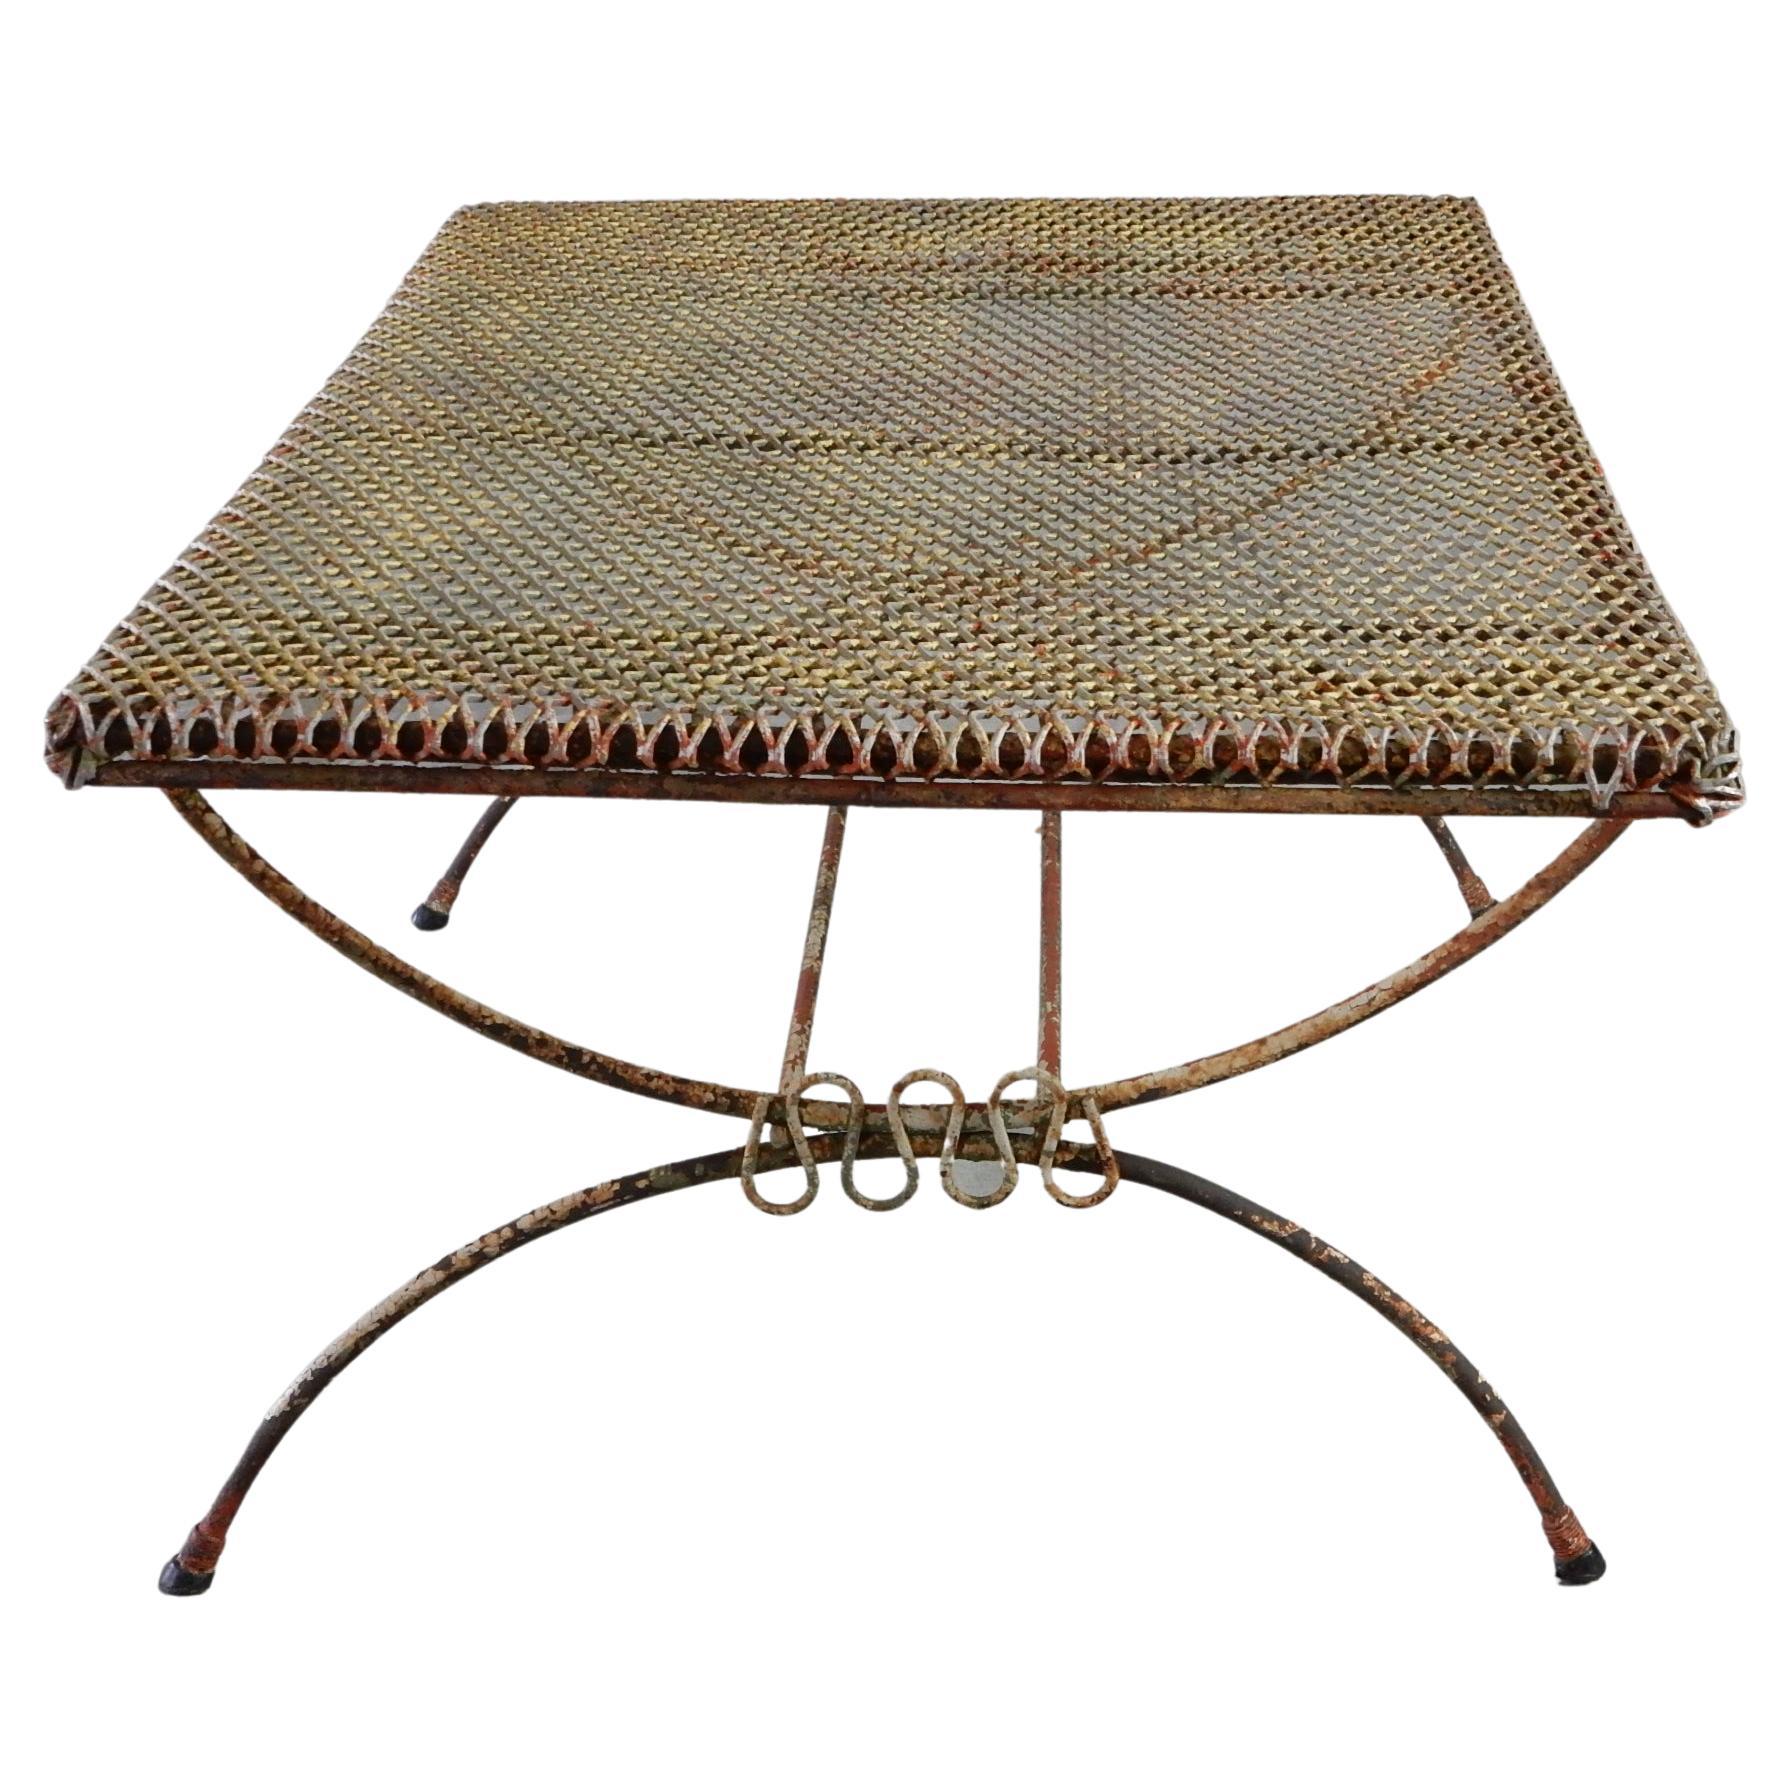 1950's Iron ribbon cocktail table attributed to Maurizio Tempestini.
Heavy steel mesh top with iron rod frame.
Several colors or paint and aged patina make this a 
wonderful unique piece for your outside patio.